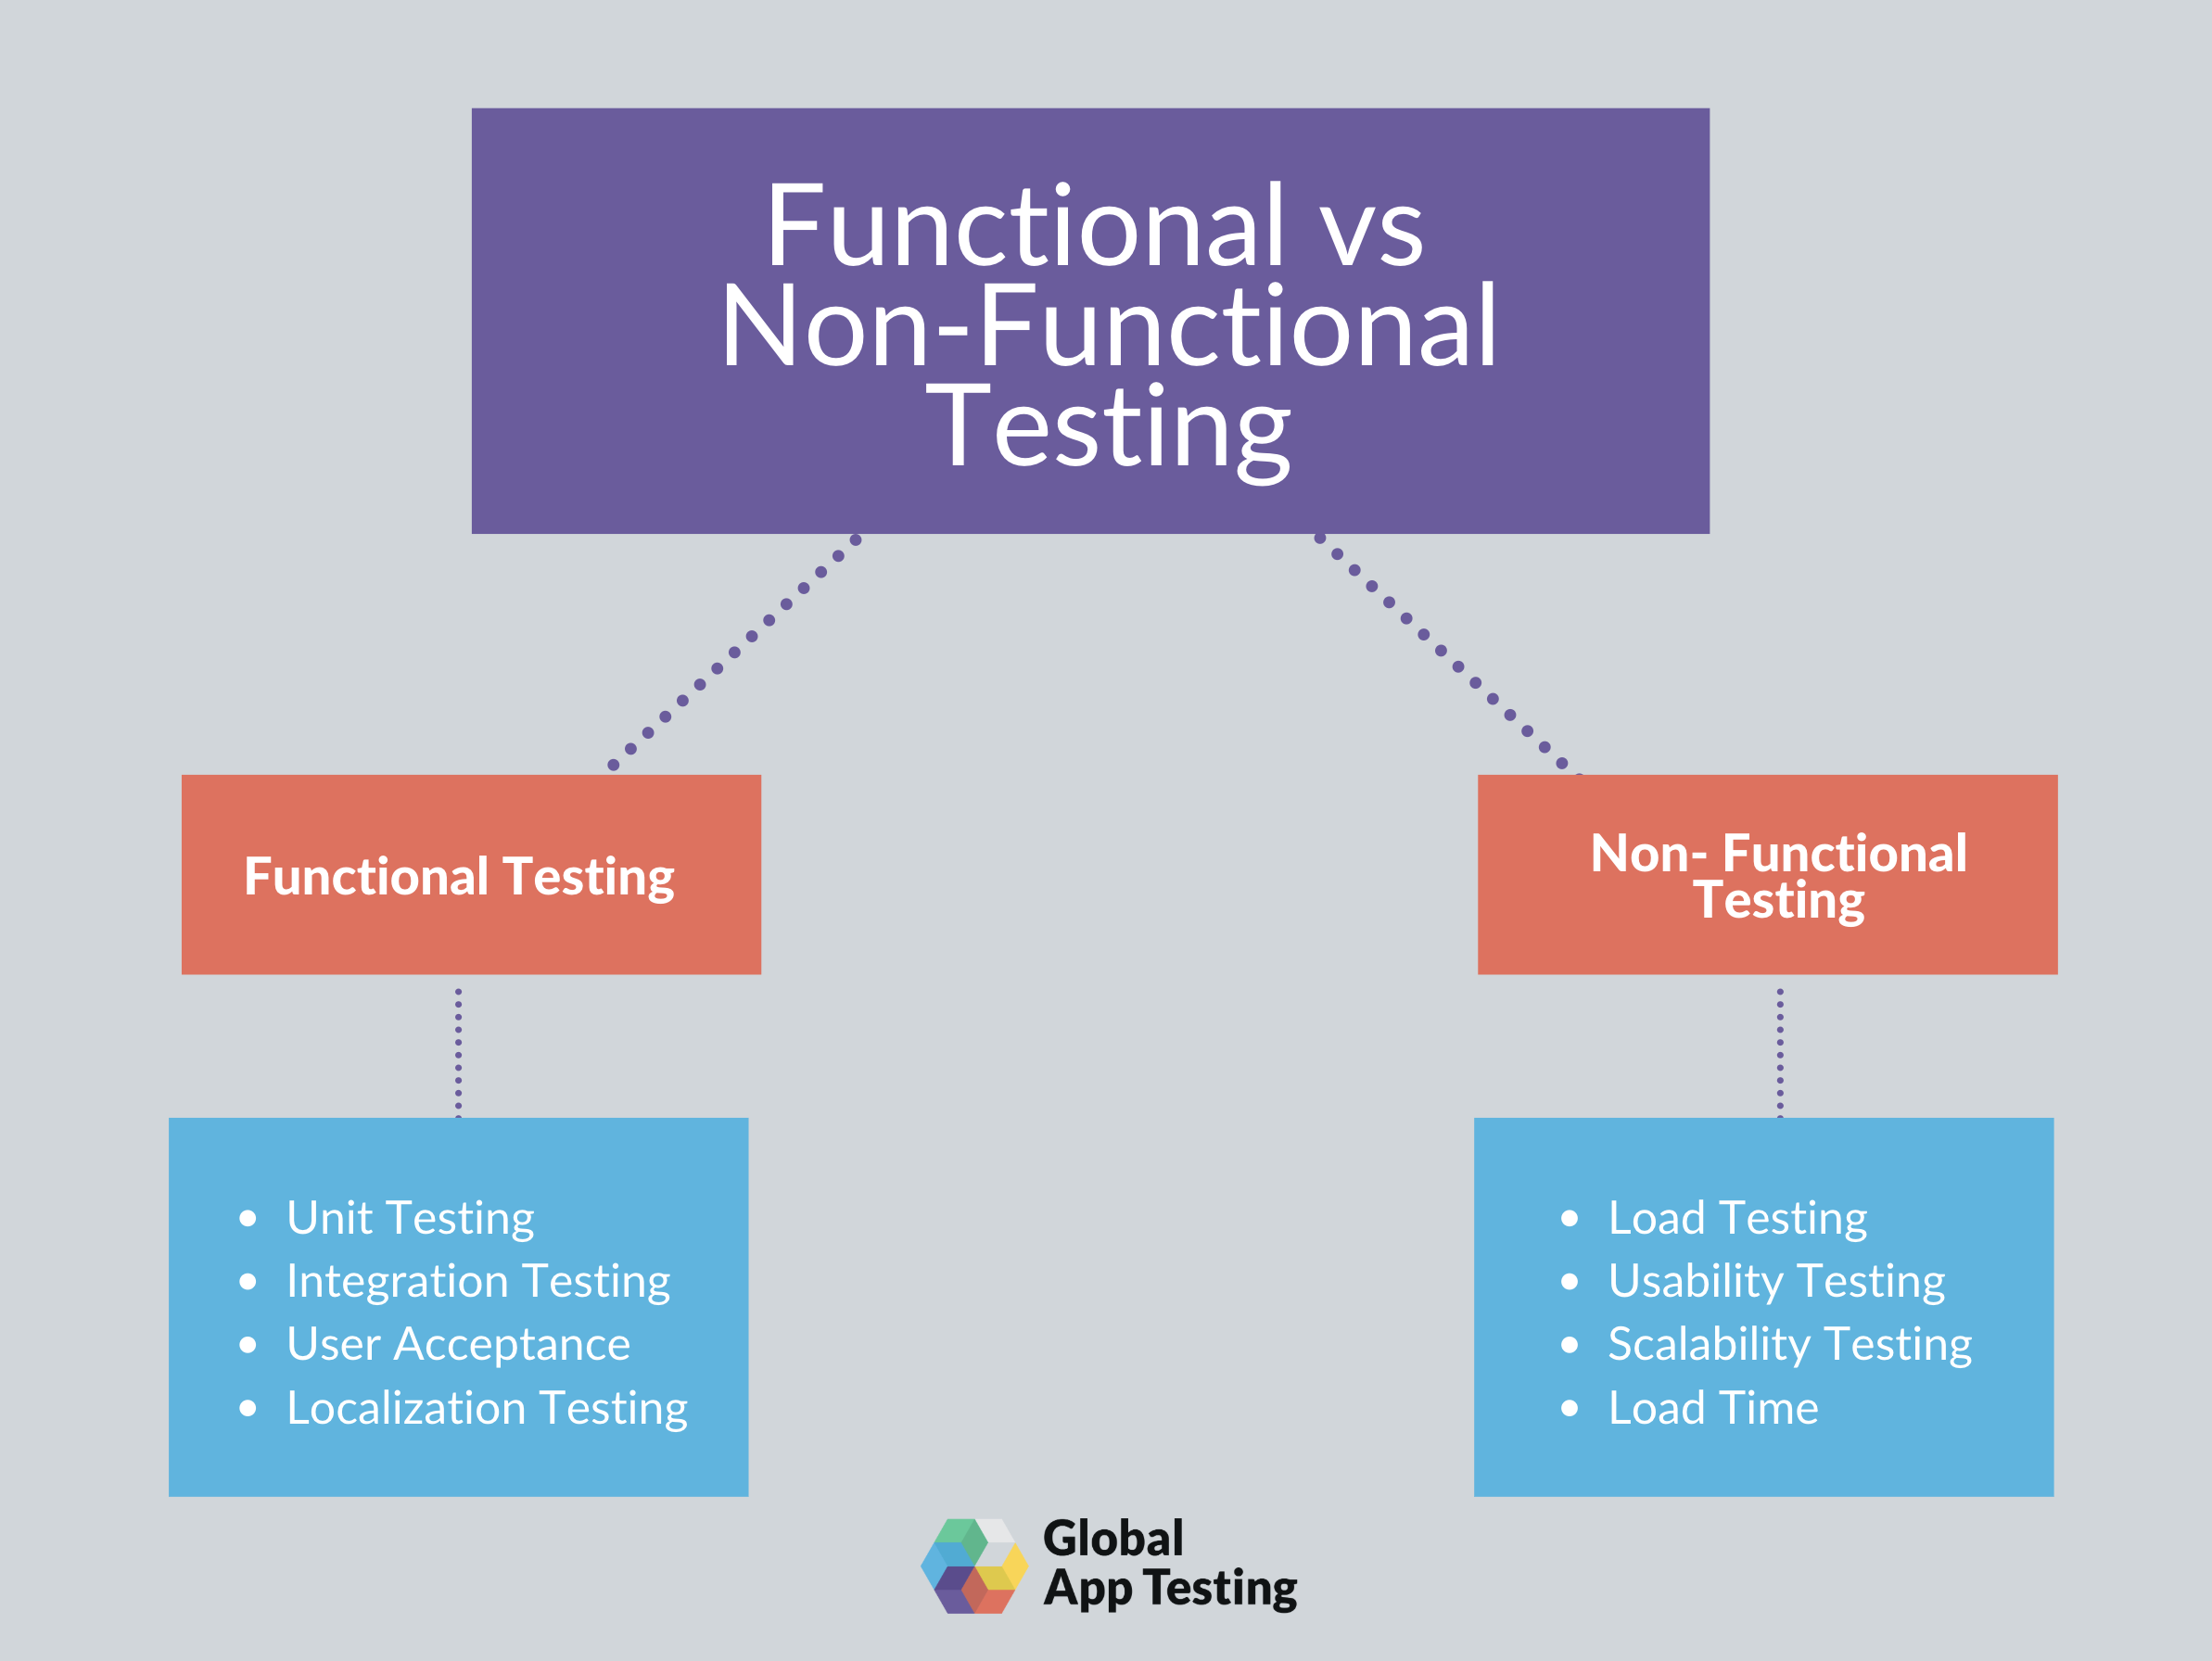 Functional vs non-functional testing comparison.